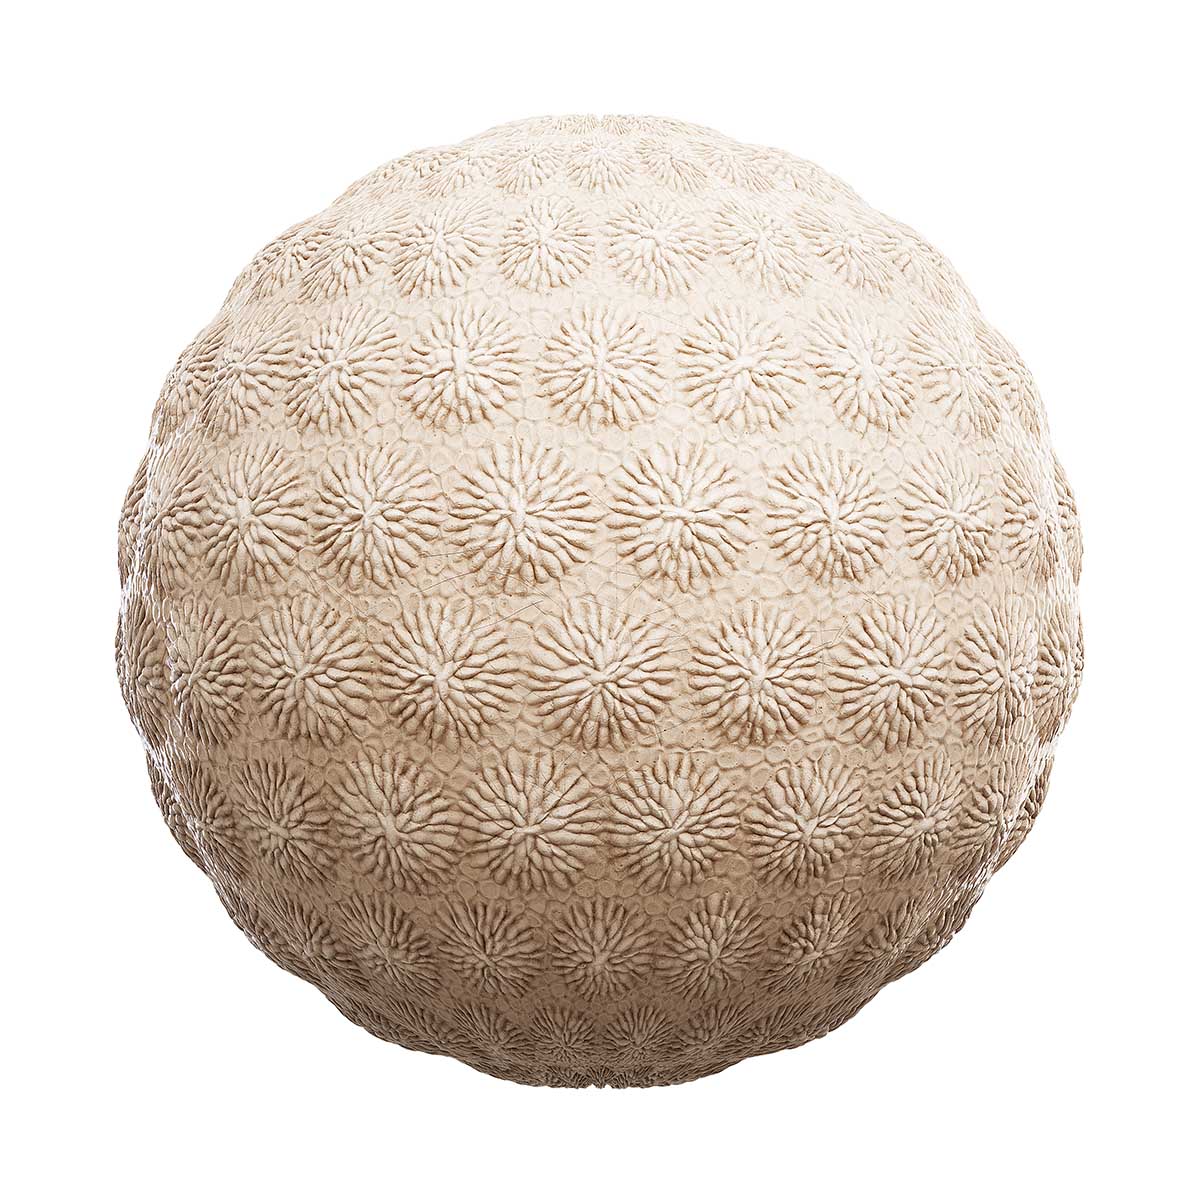 Patterned Beige Clay PBR Texture